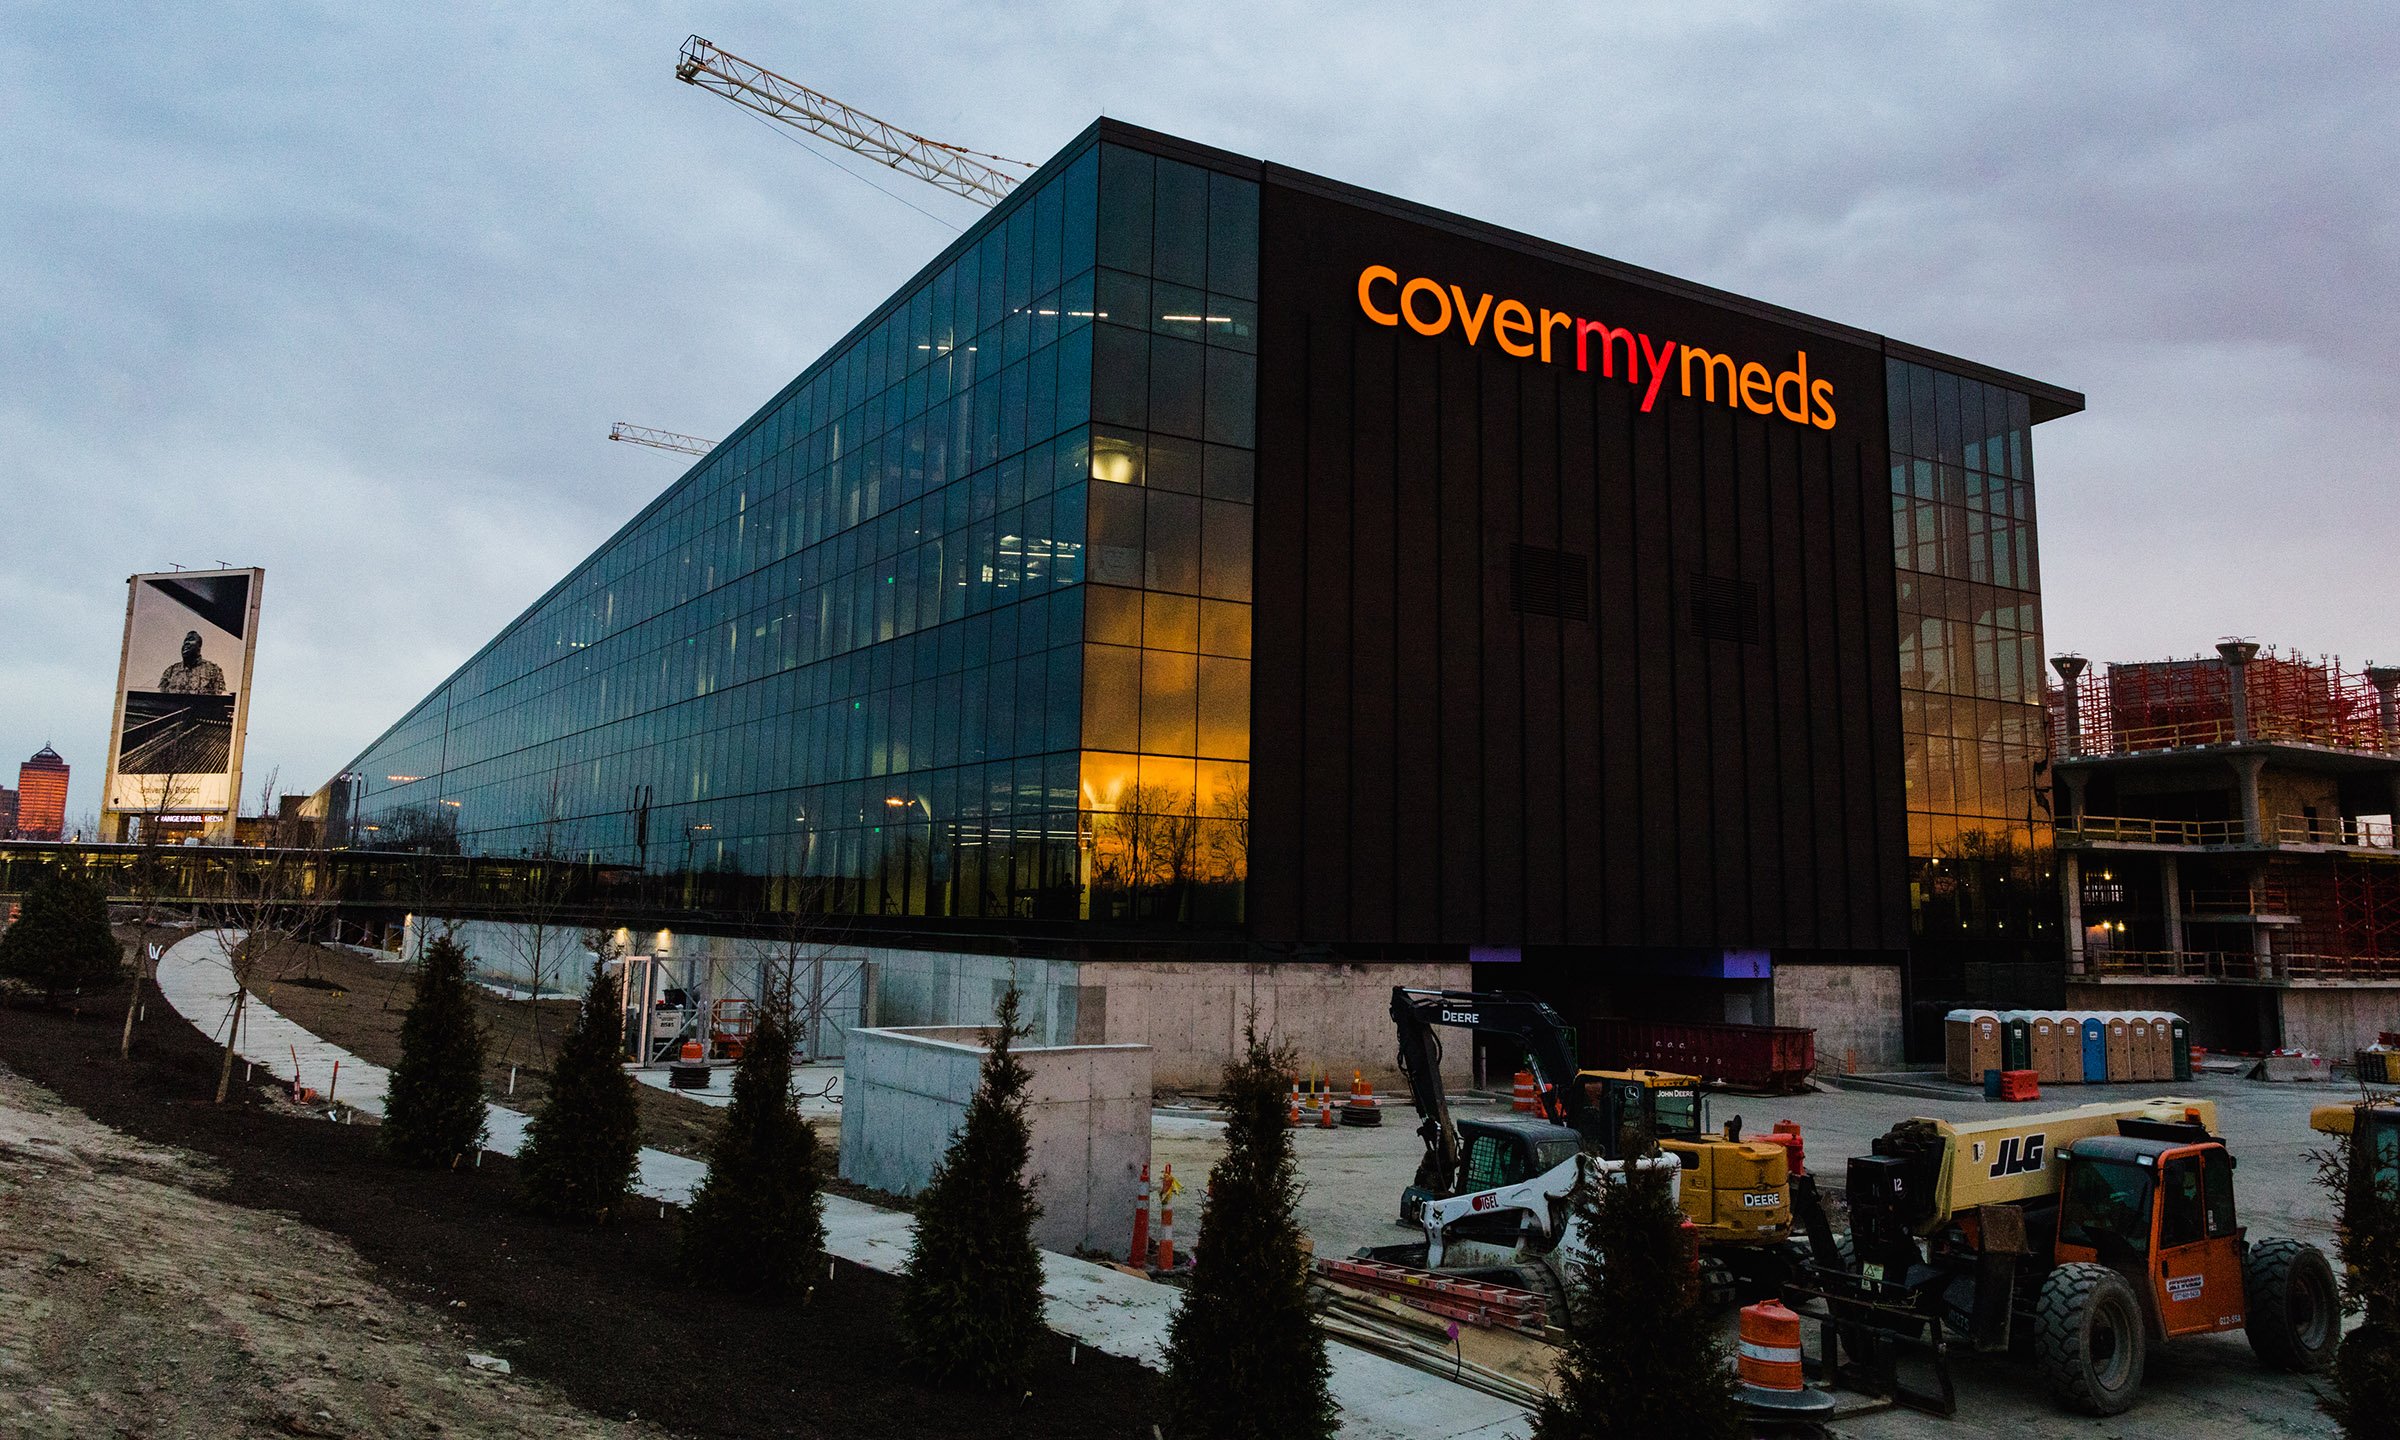 A photo of the exterior of campus with the CoverMyMeds sign visible. 